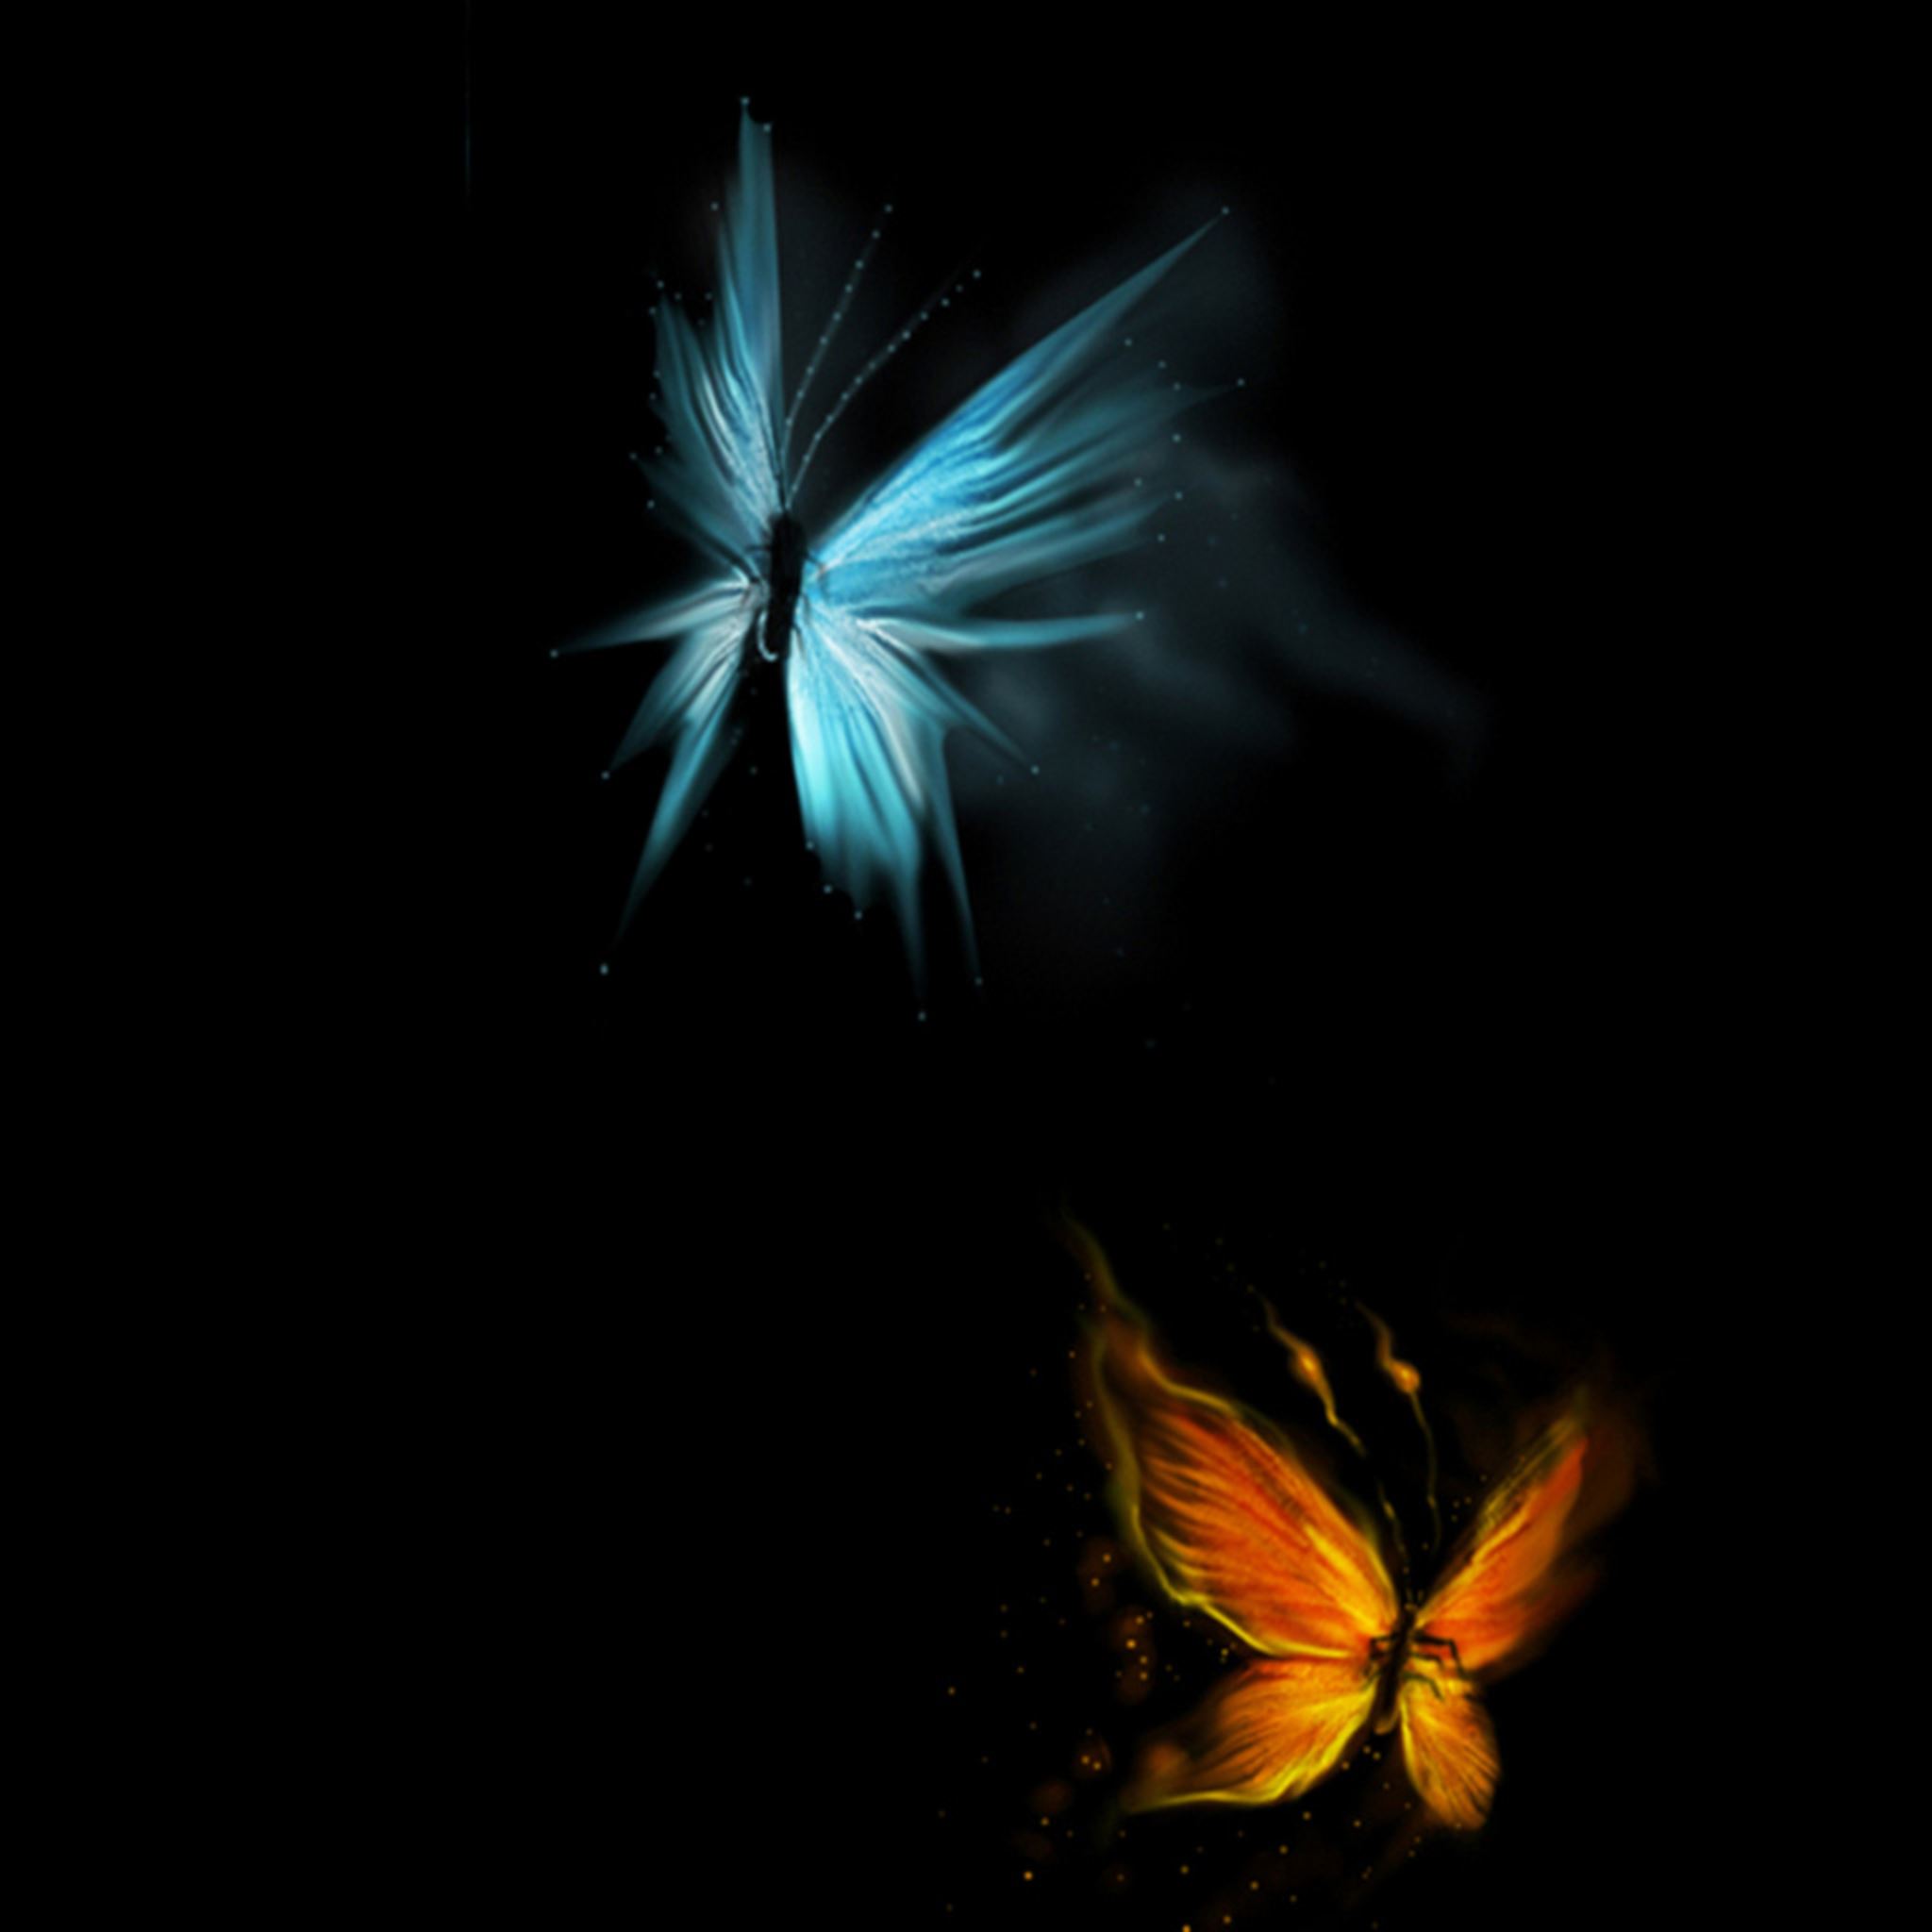 Abstract Butterfly Art iPad Air Wallpaper Free Download